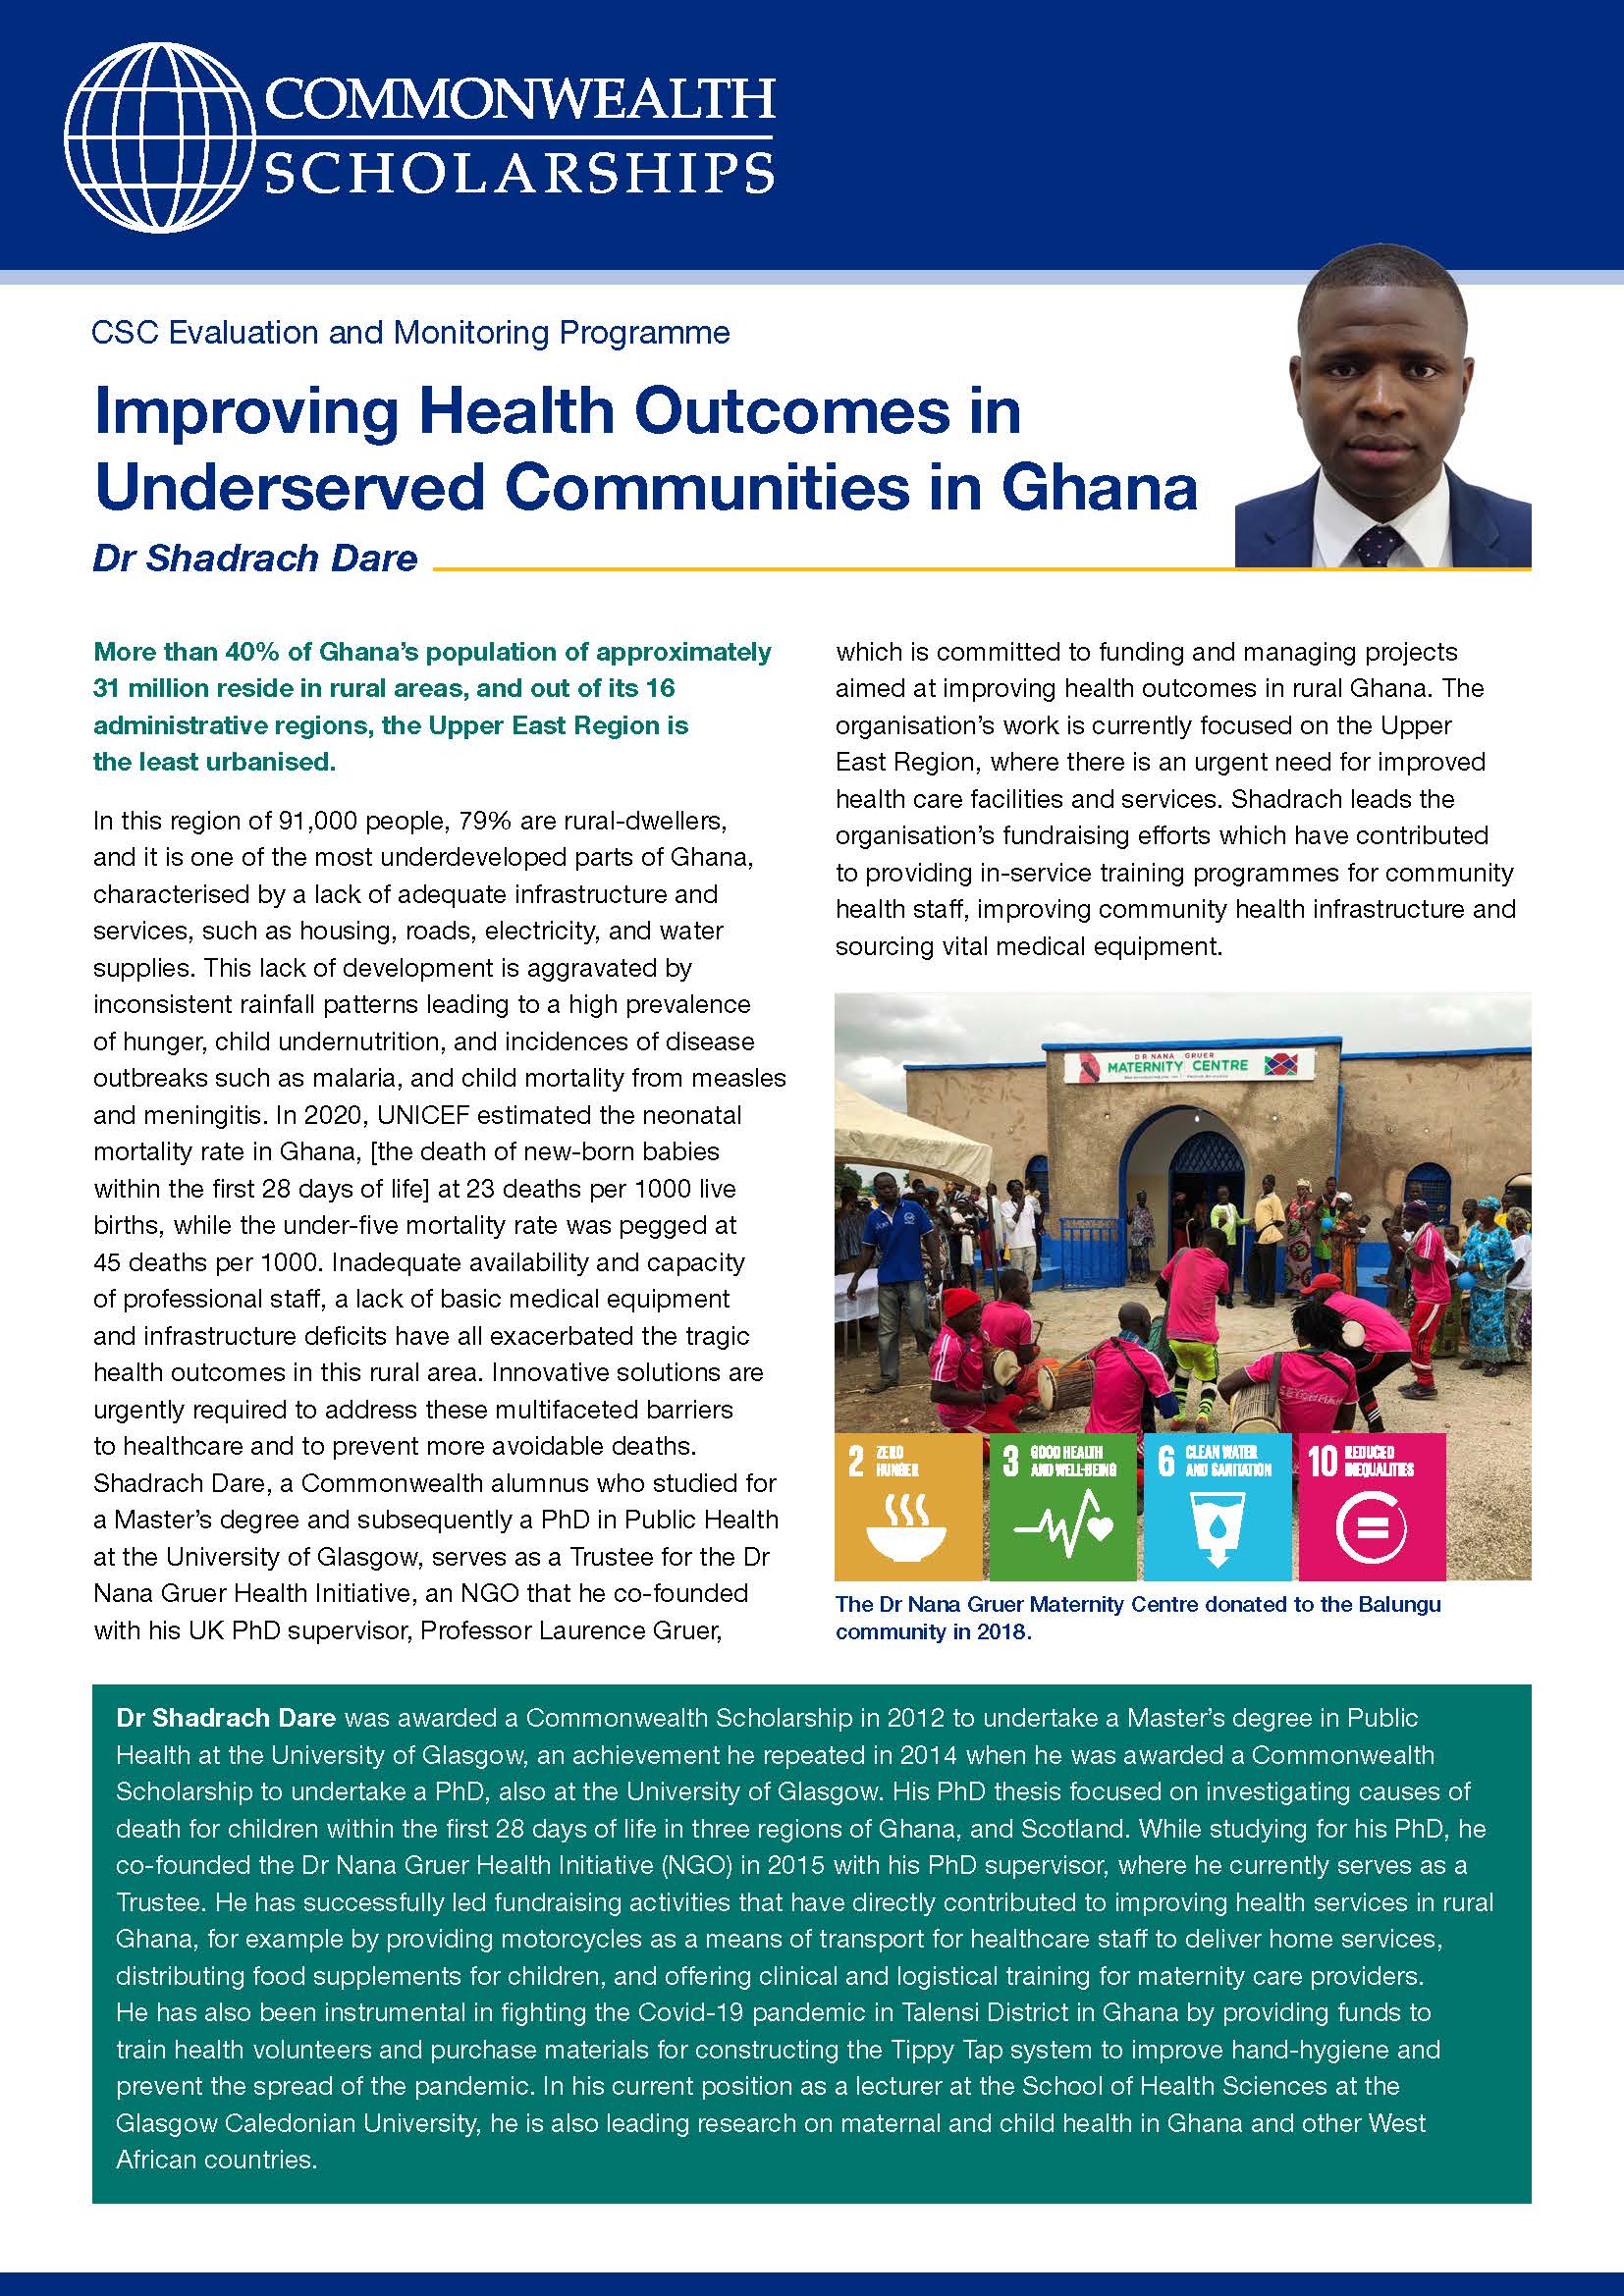 Improving Health Outcomes in Underserved Communities in Ghana